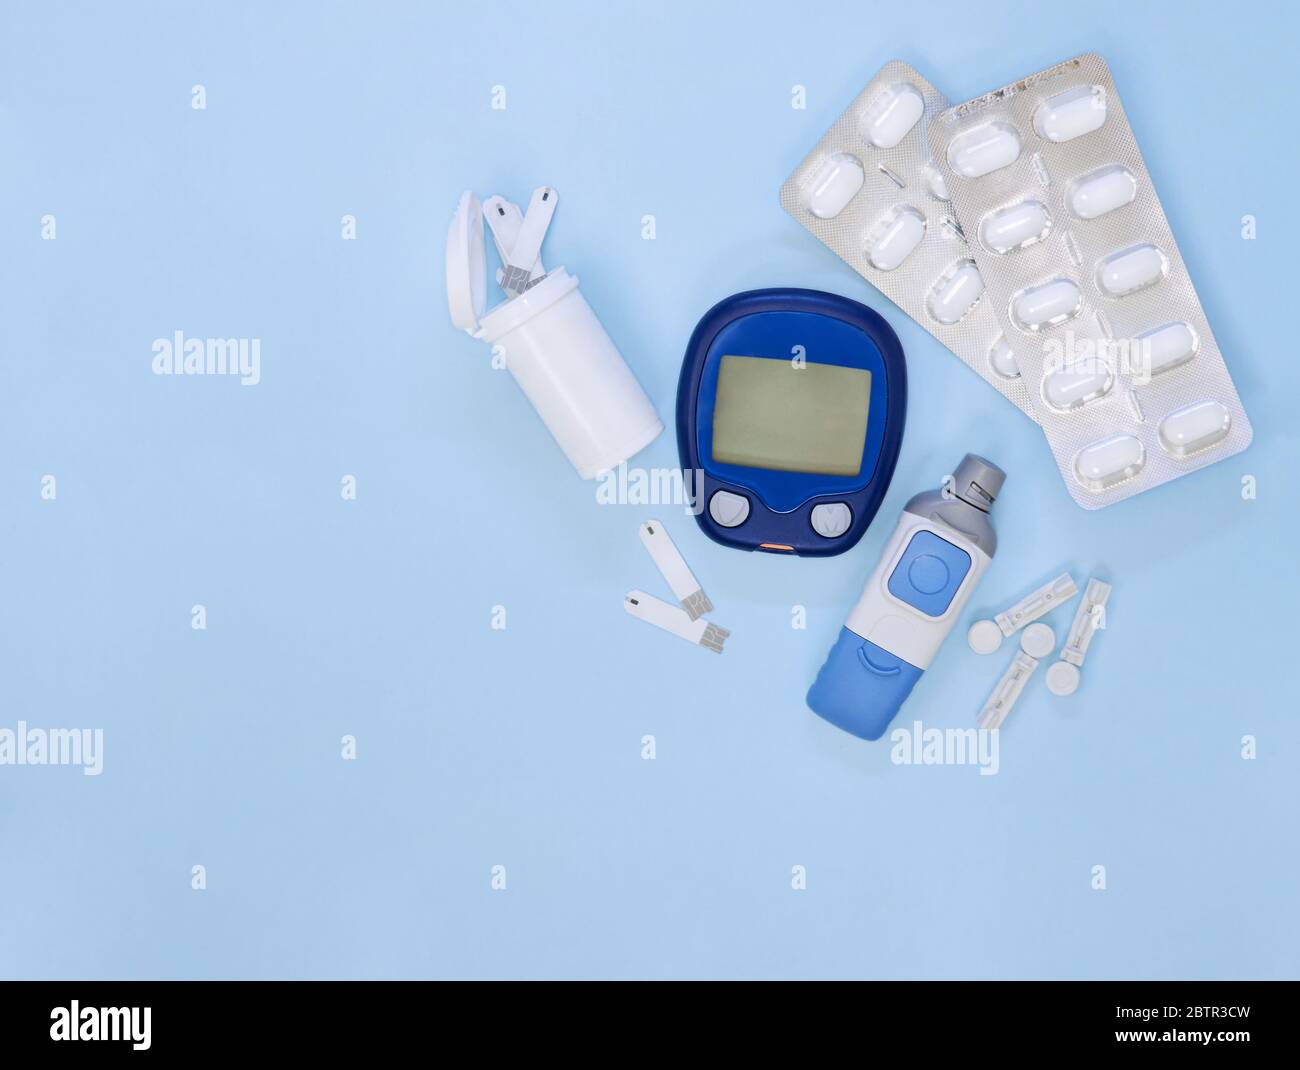 Diabetic kit: glucometer, test strips, lancet, metformin tablets. Top view, blue background, empty space. Stock Photo